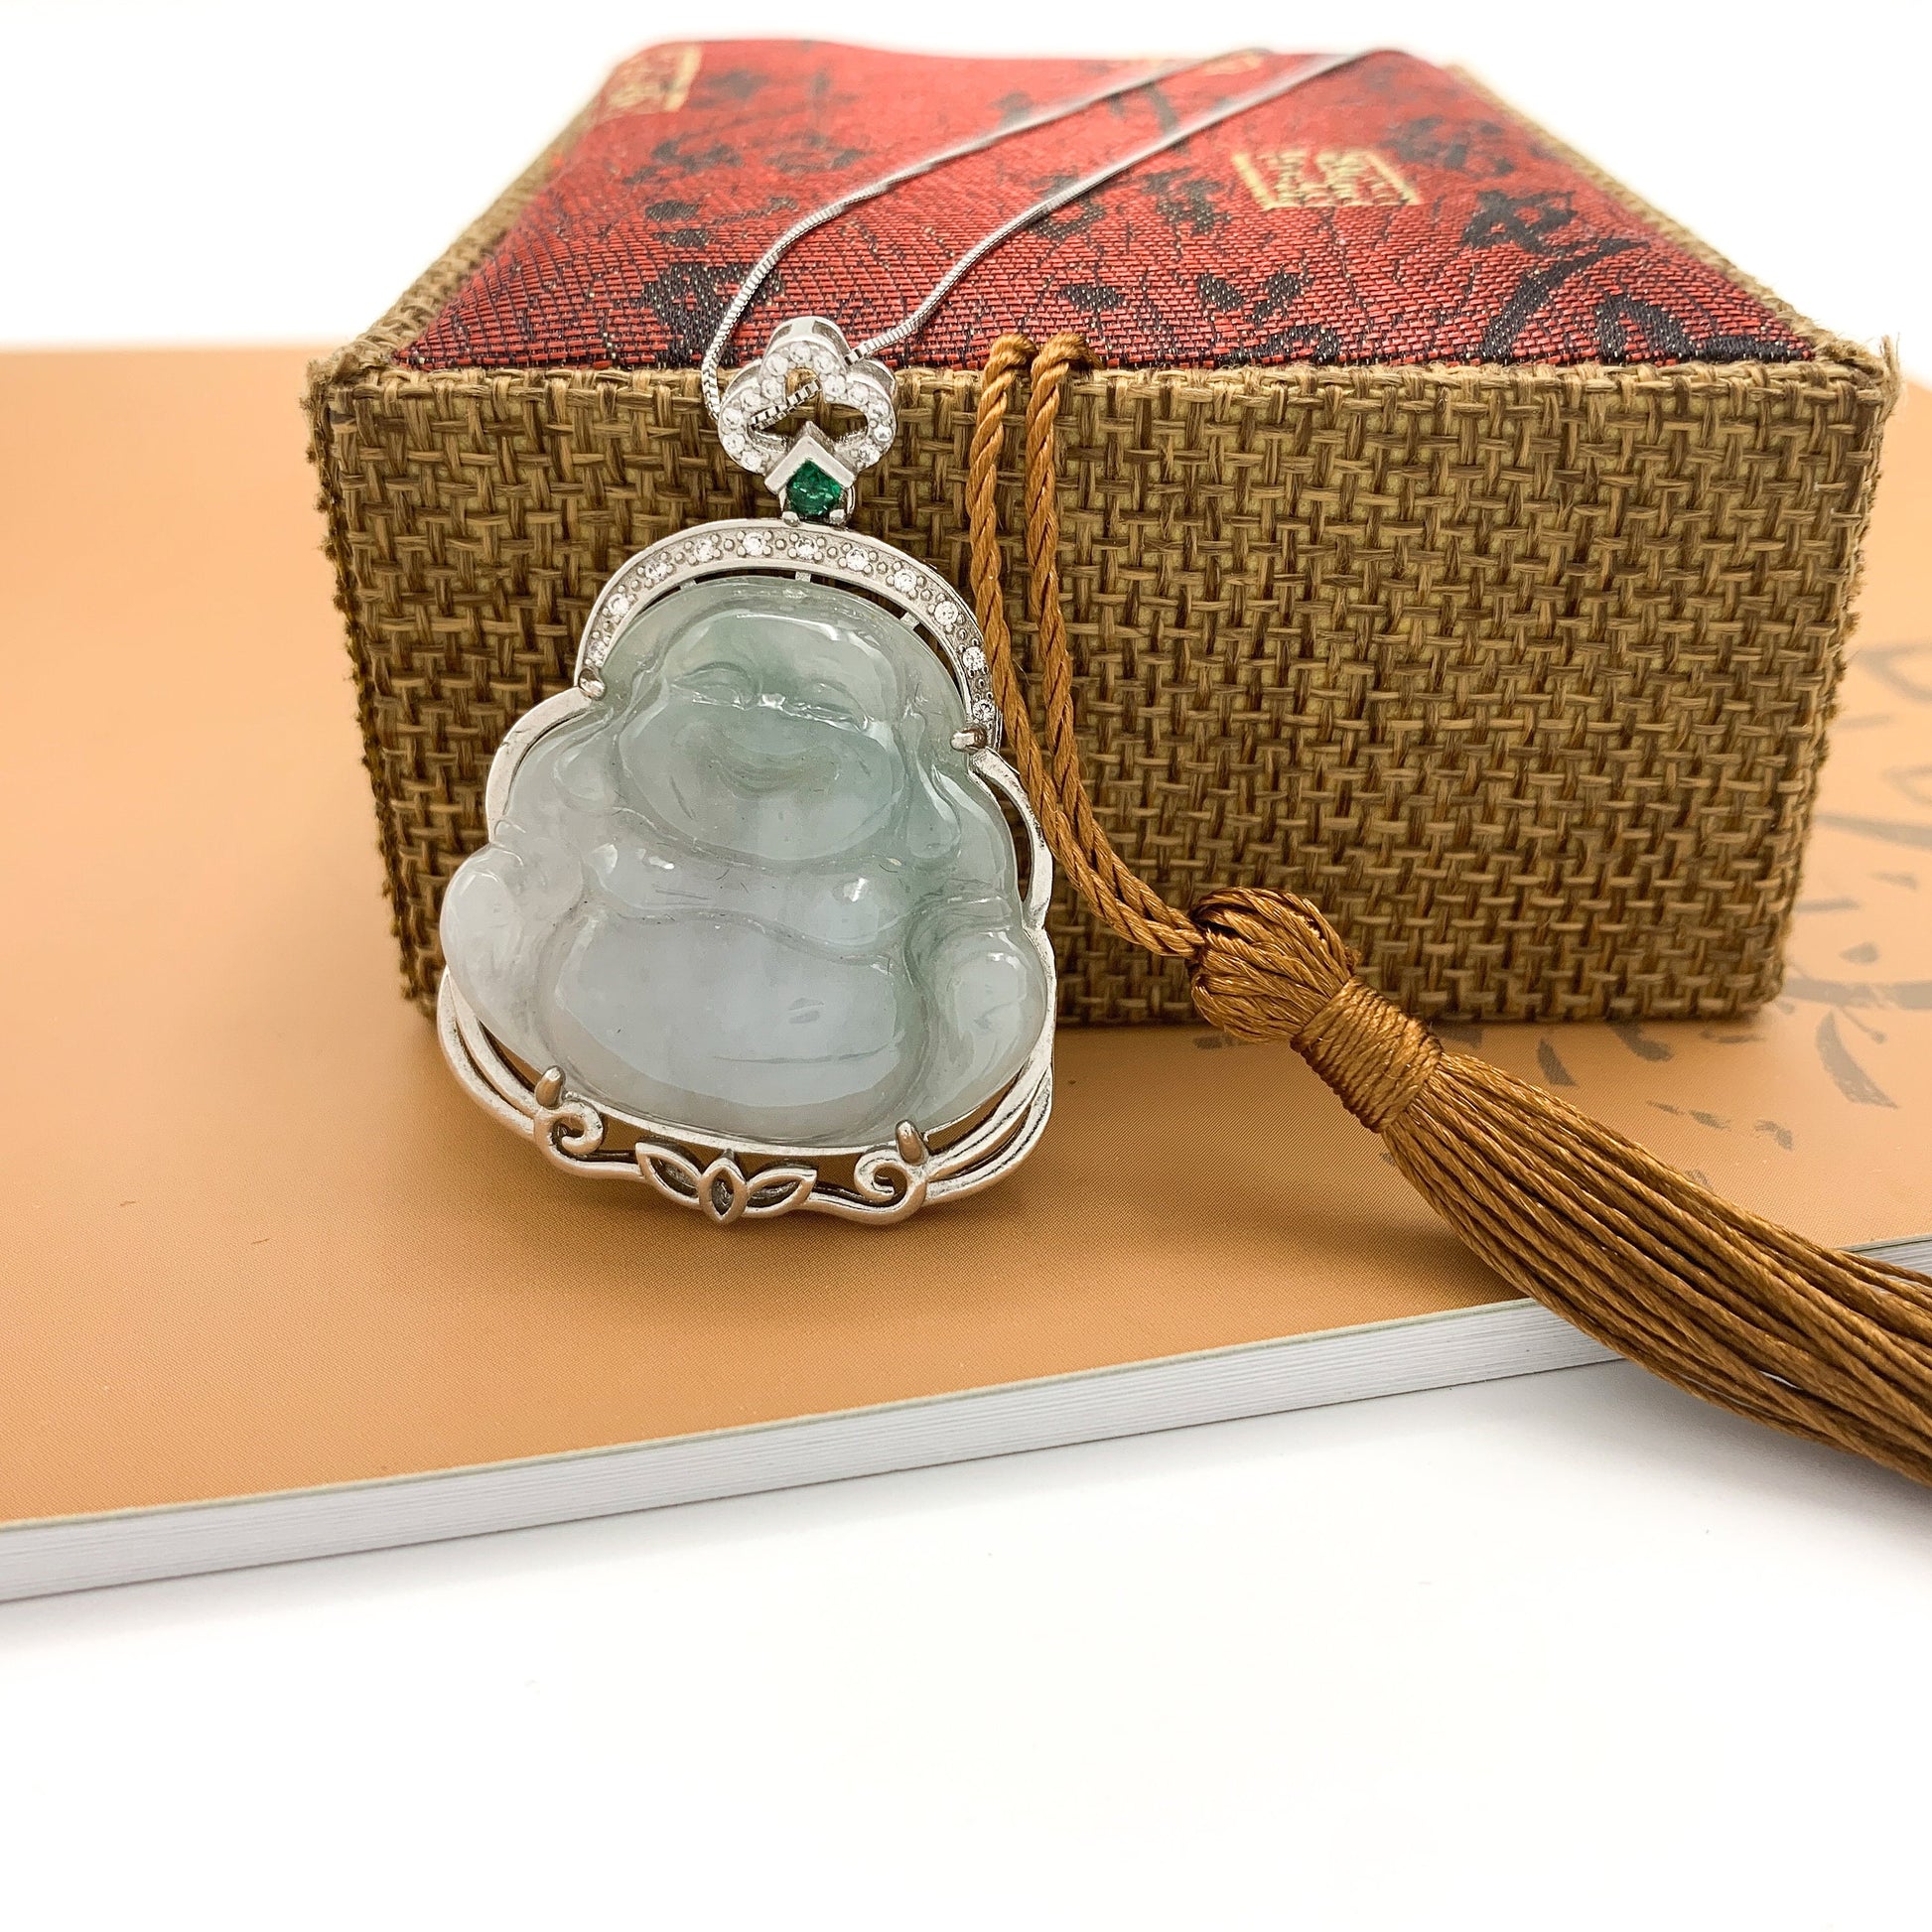 Jadeite Jade Buddha Carved Pendant Sterling Silver Necklace, BJ-0621-1646666730 - AriaDesignCollection